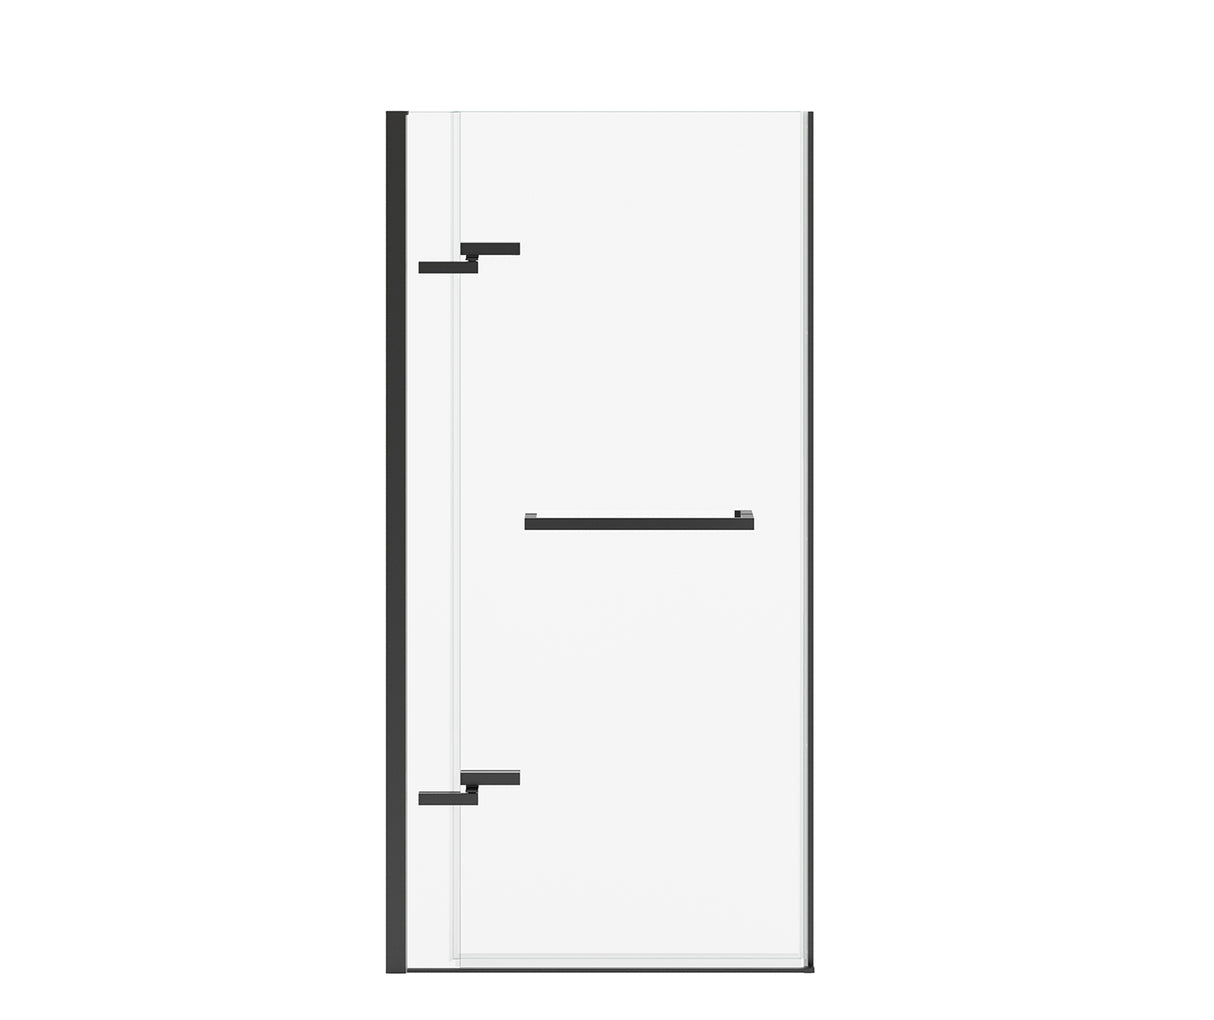 MAAX 139578-900-340-000 Reveal Sleek 71 44-47 x 71 ½ in. 8mm Pivot Shower Door for Alcove Installation with Clear glass in Matte Black